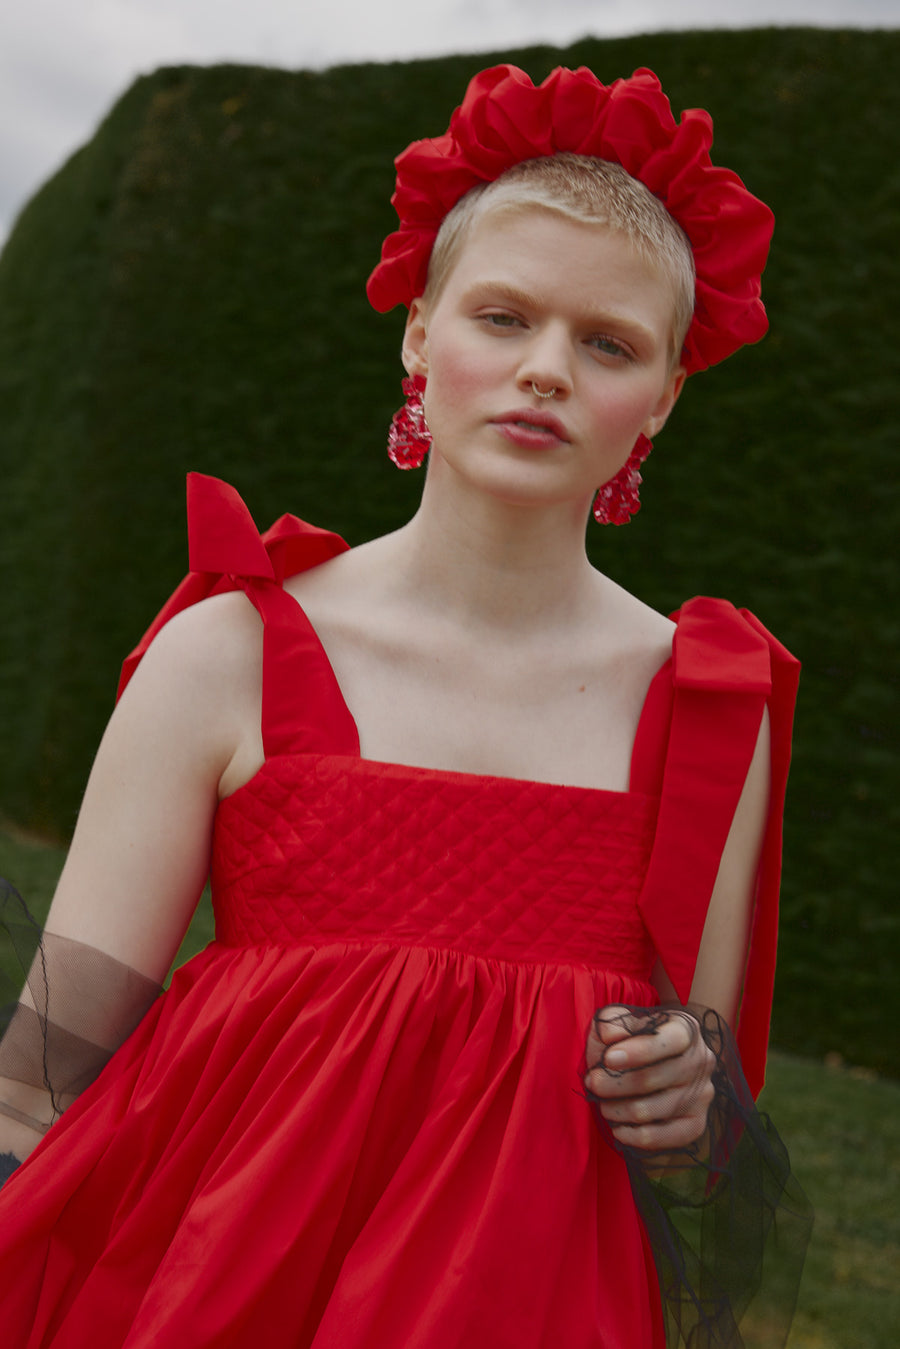 Quilted bodice details of the Dolly Mini Dress in Poppy Red by House of Campbell.